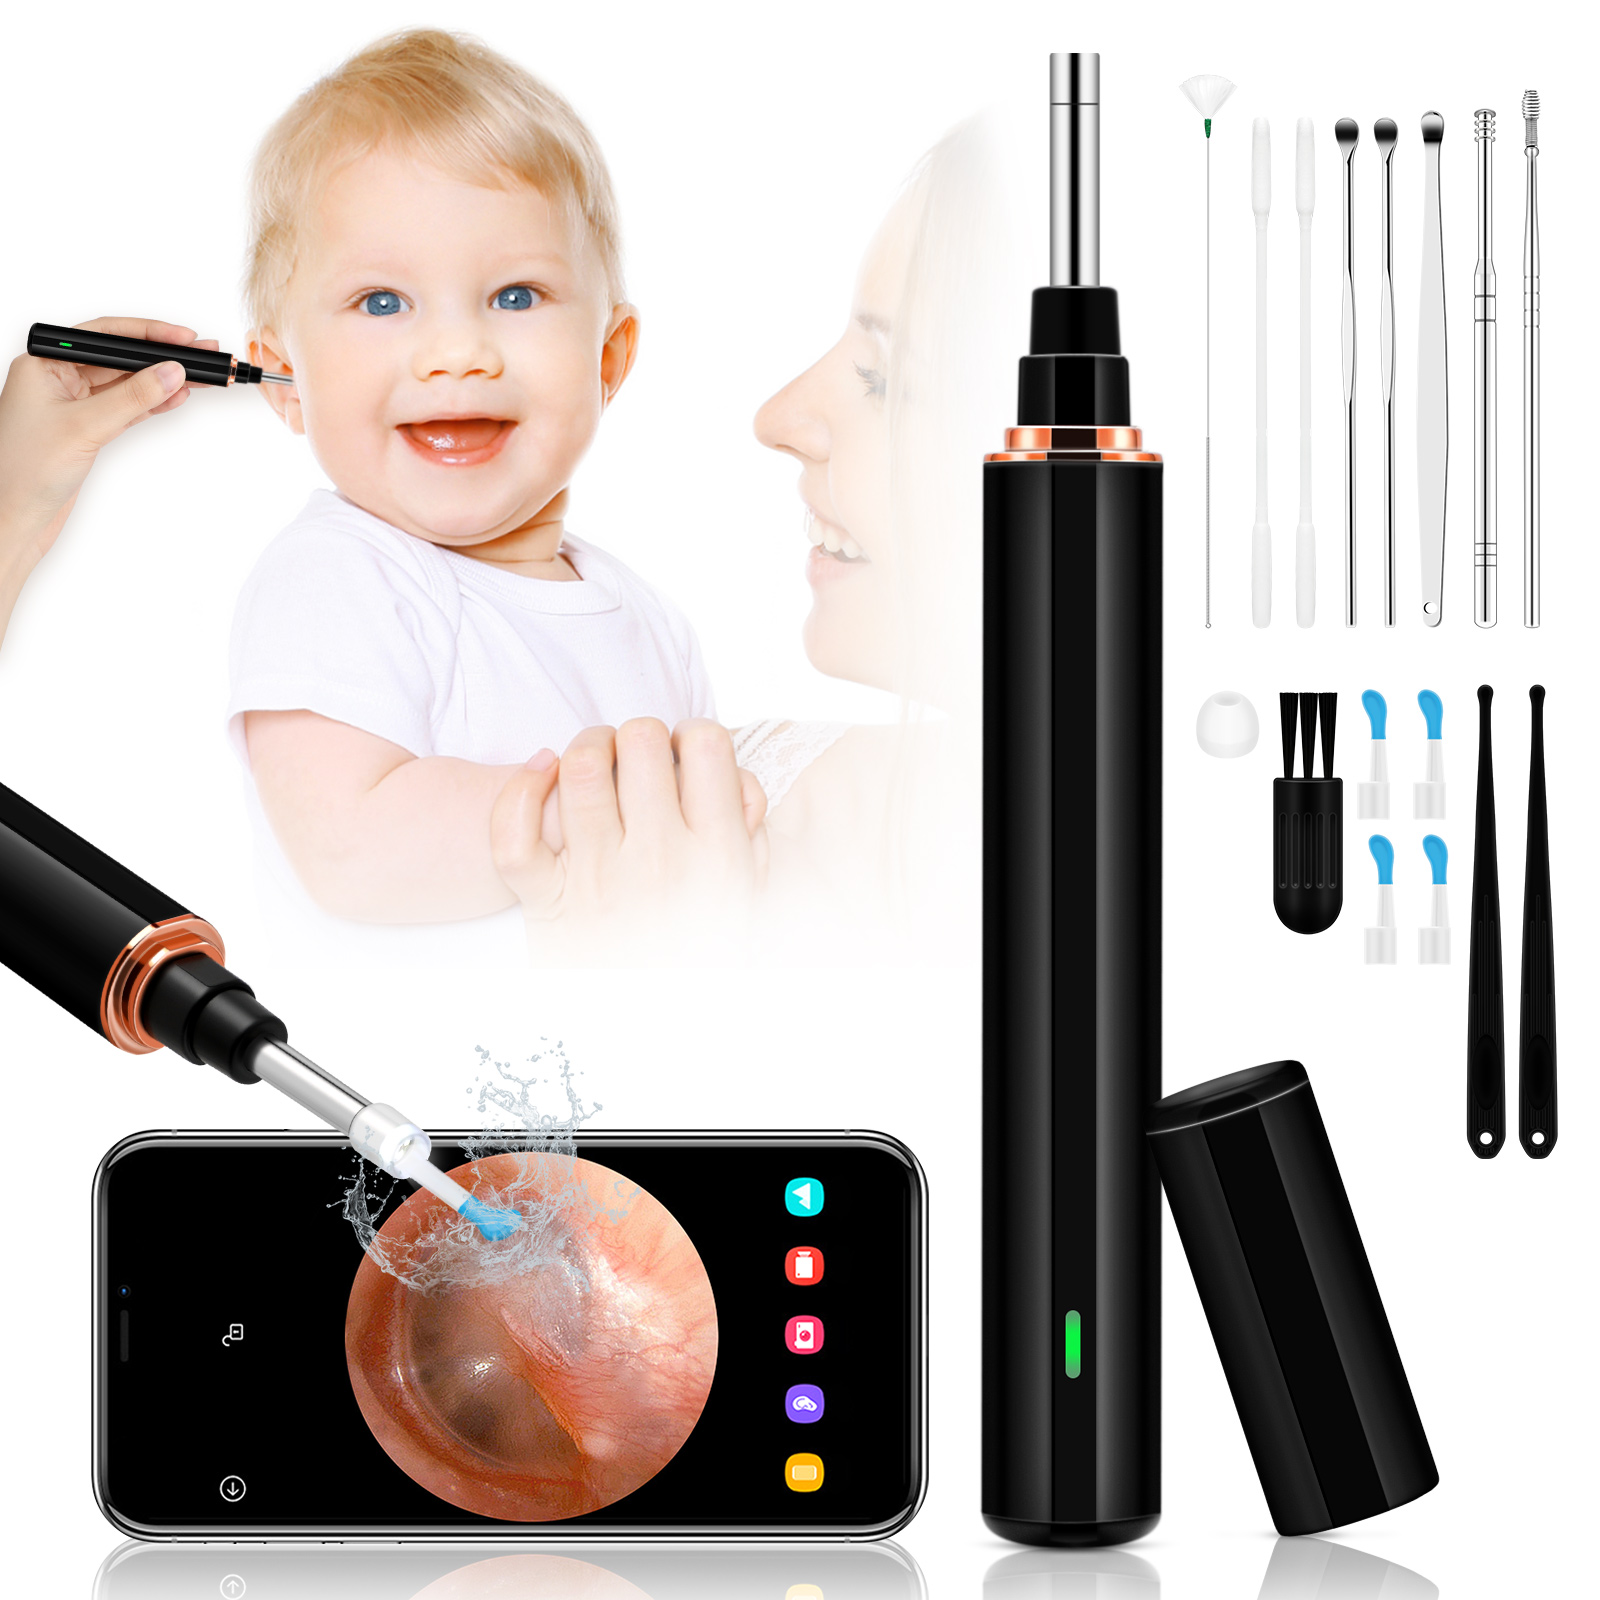 Siyaluens Ear Wax Removal Tool with 6 LED Lights 1296P FHD Mini Wireless Otoscope, 16pcs Ear Pick Compatible with iOS, IPad & Android, Safe Ear Cleaning Camera for Adults, Children & Pets